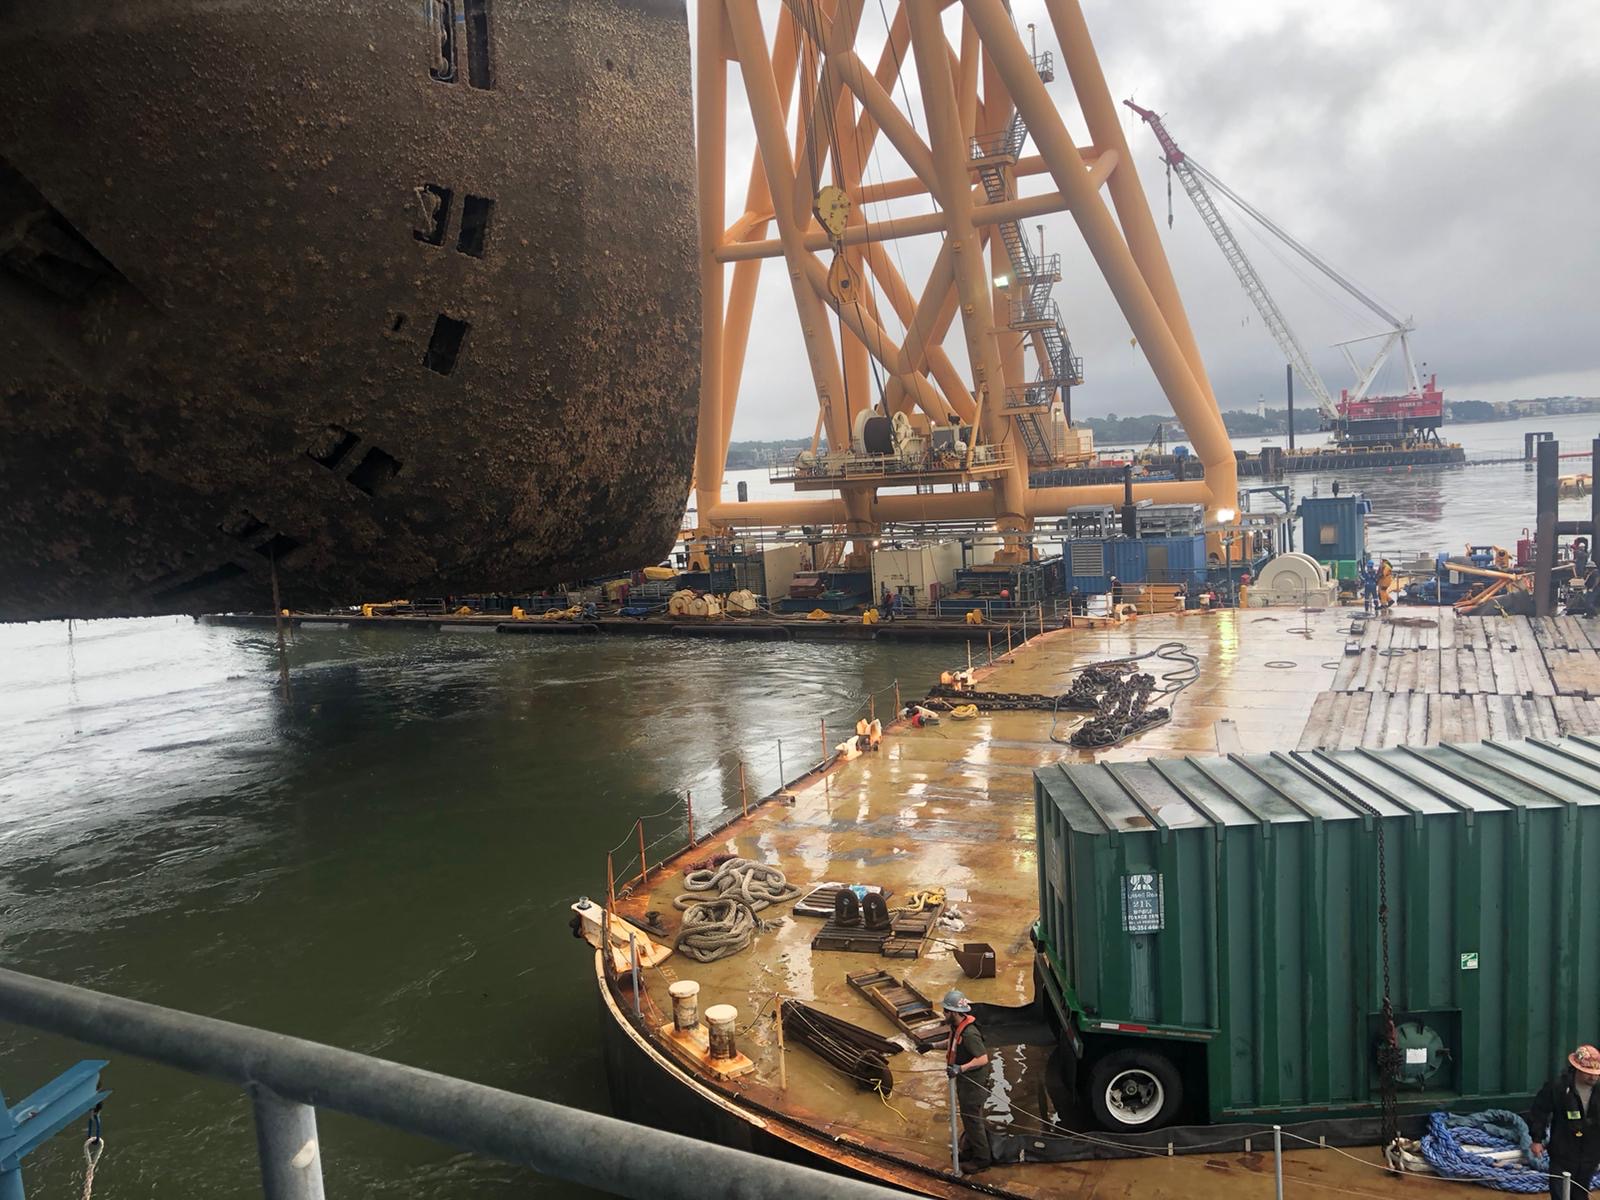 A Chain Just Cut Through A Capsized Cargo Ship Filled With Cars And The Process Is Fascinating